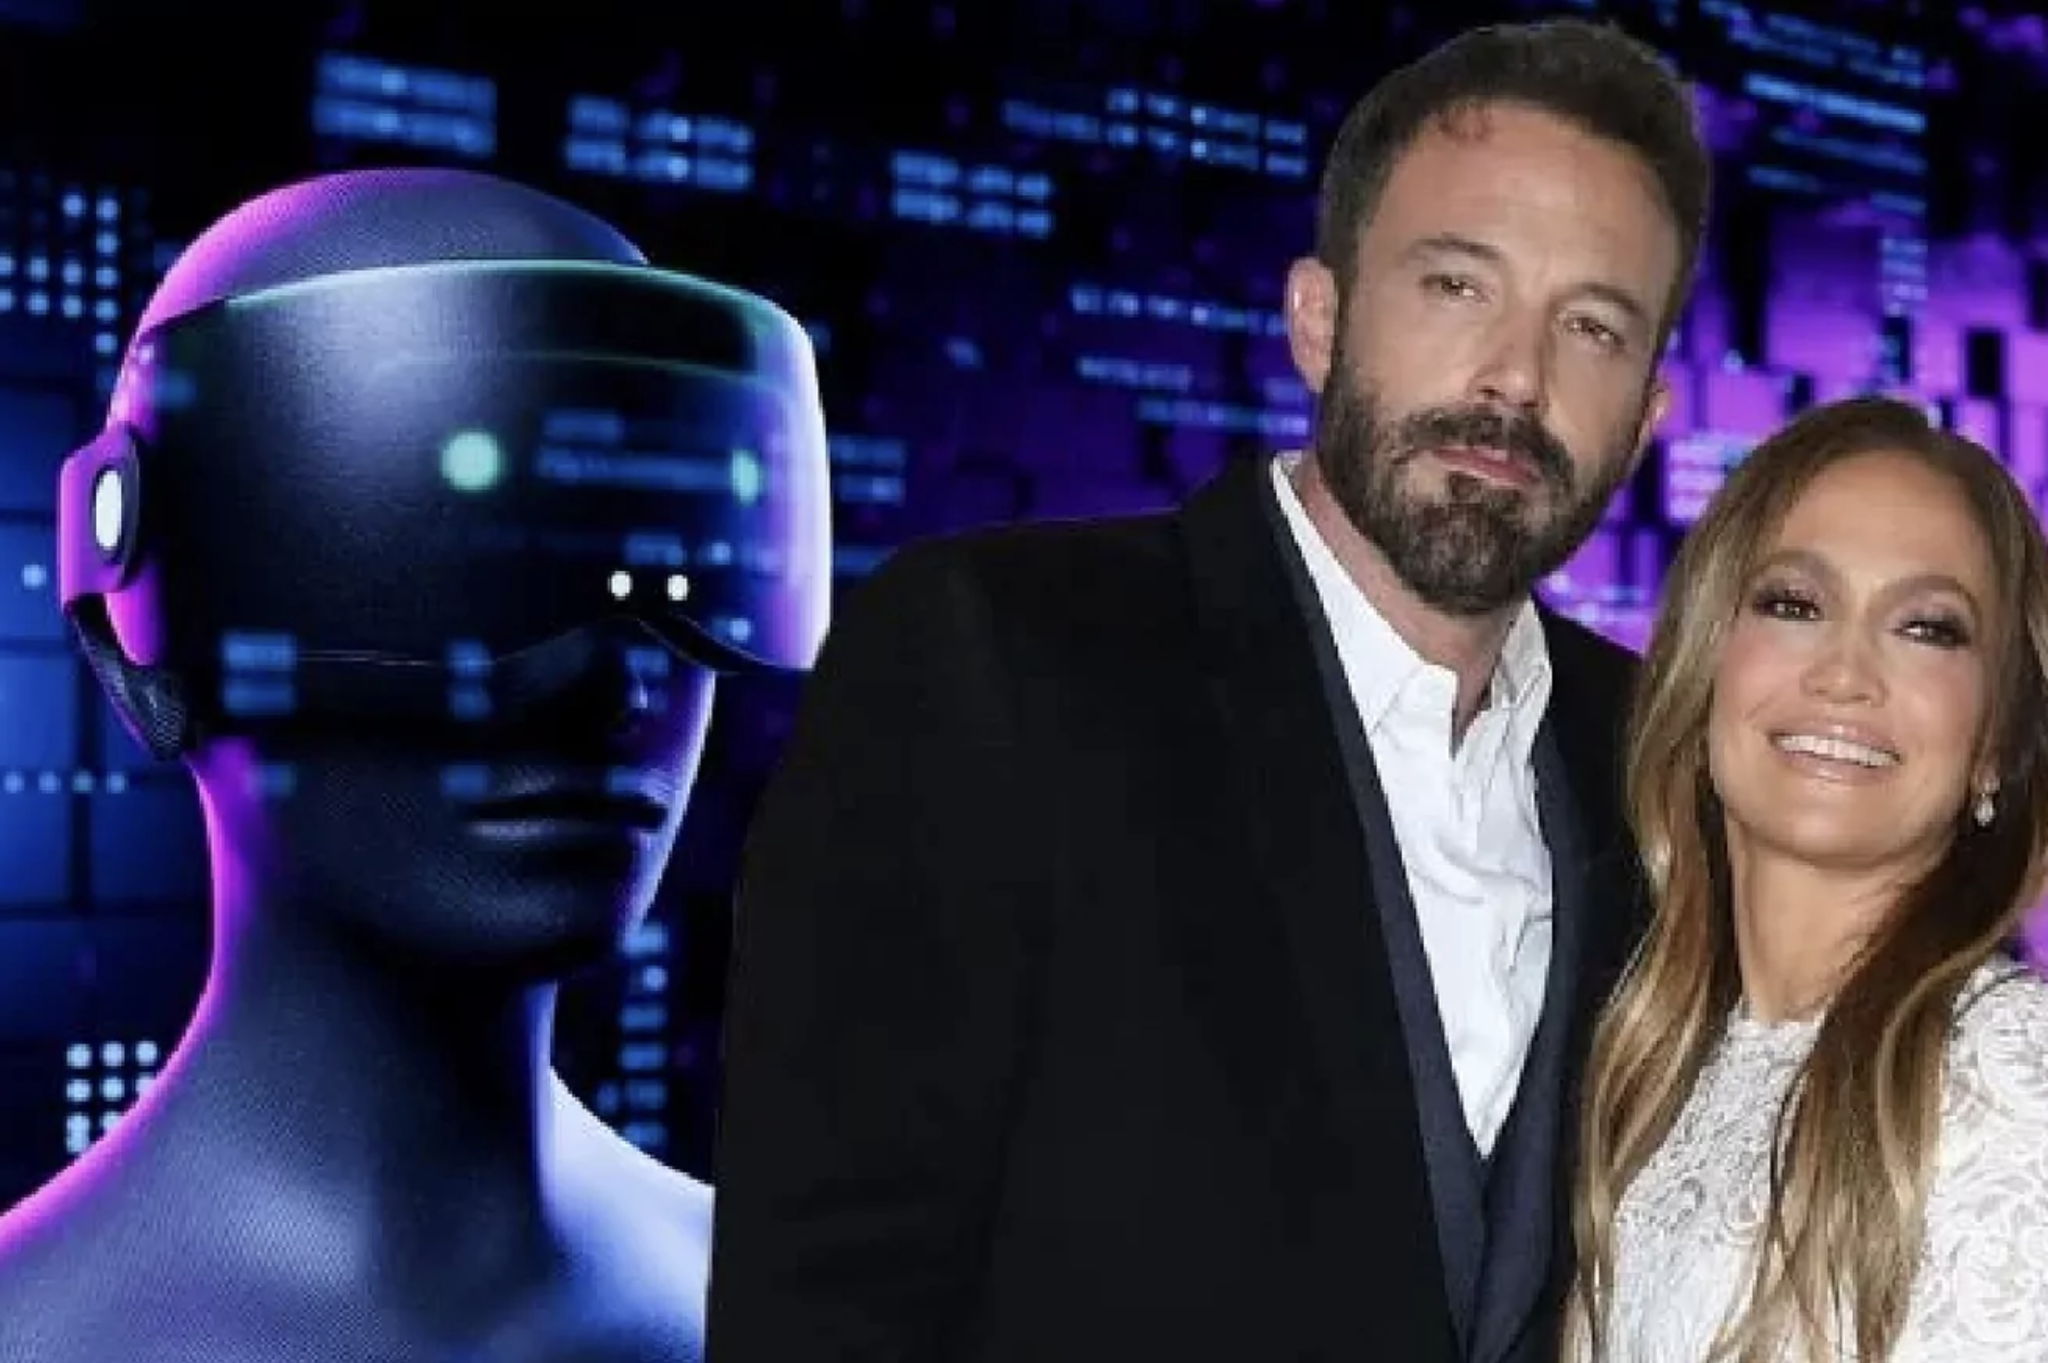 What Jennifer Lopez and Ben Affleck's children would look like according to Artificial Intelligence